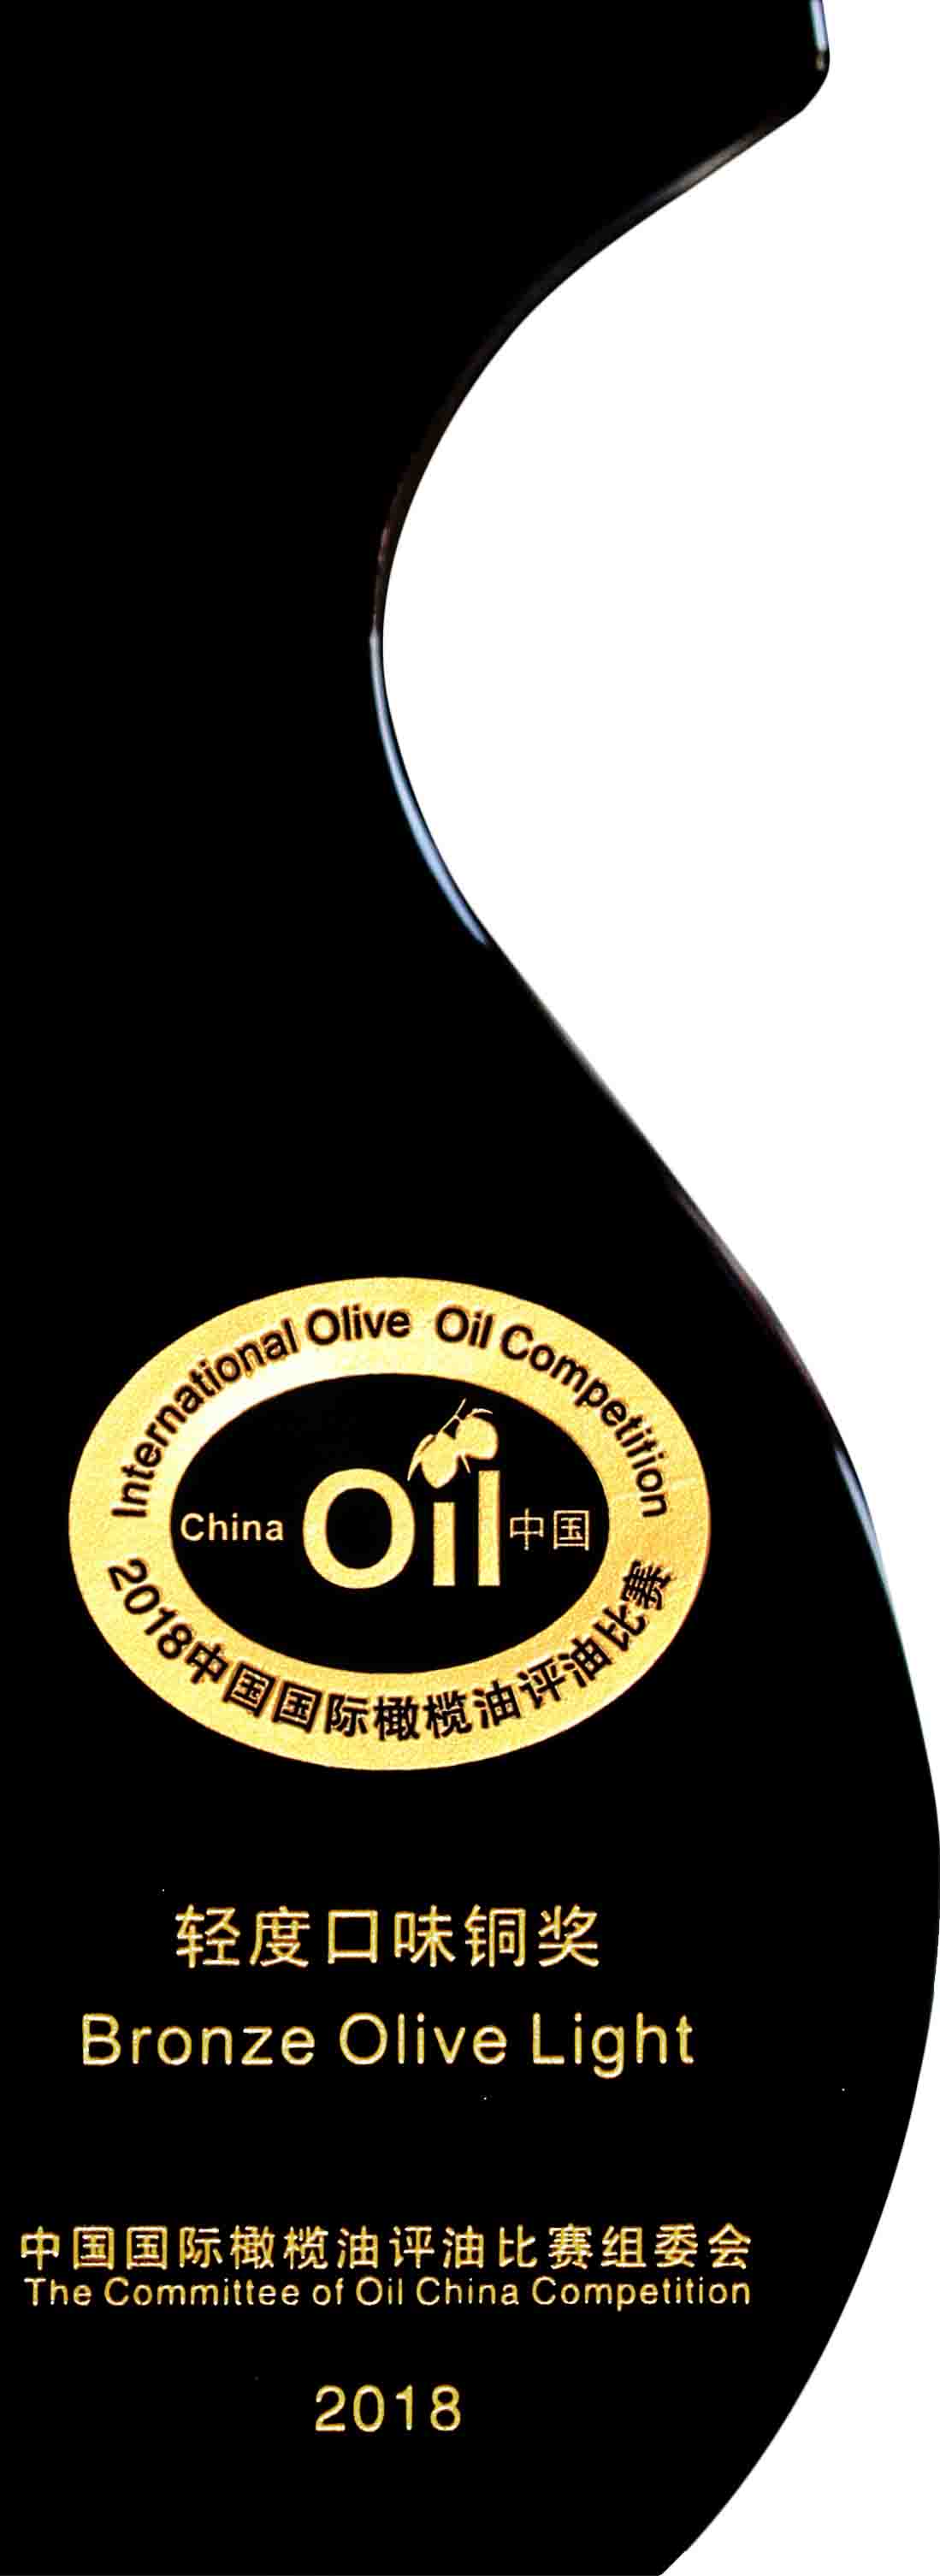 China International Olive Oil Competition 2018 Trophy